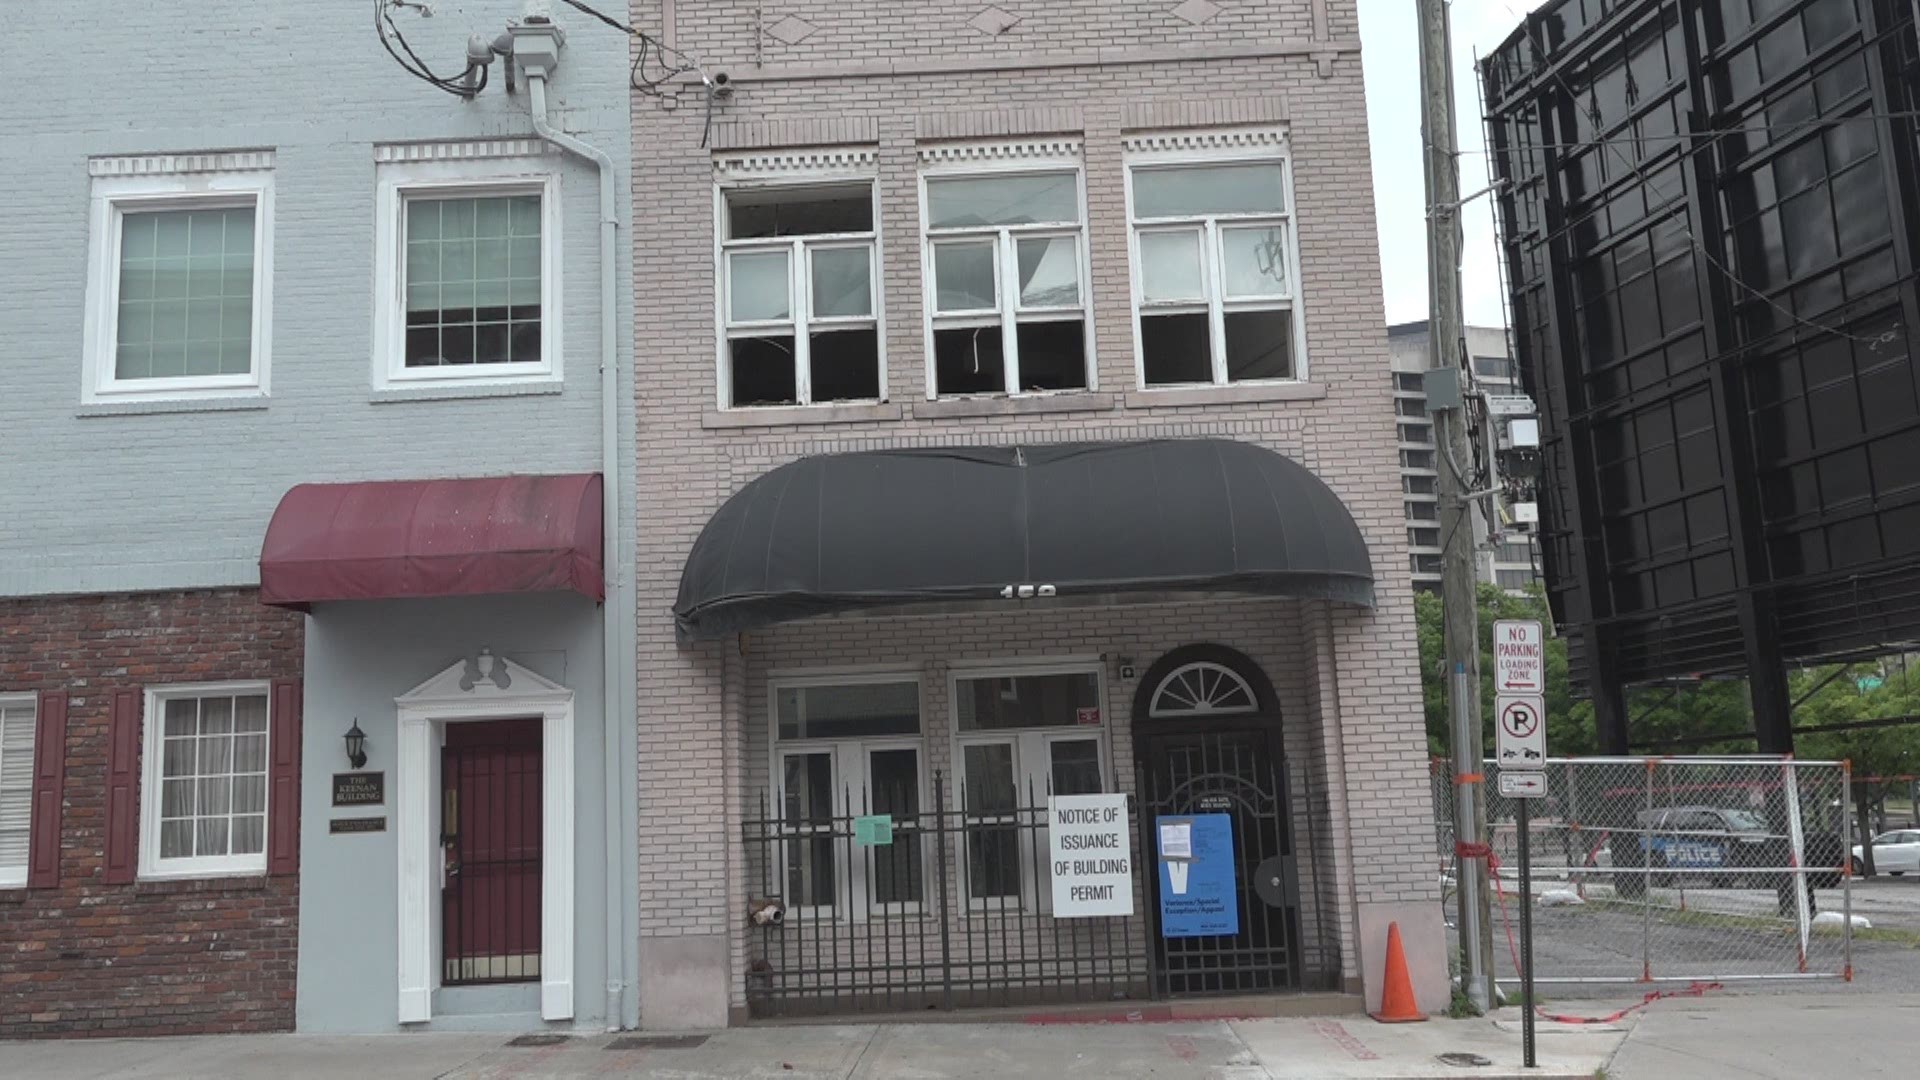 This historic 1920 building where Fiddlin' John Carson recorded what is considered to be the first country music hit will be demolished and replaced with a Margaritaville hotel.